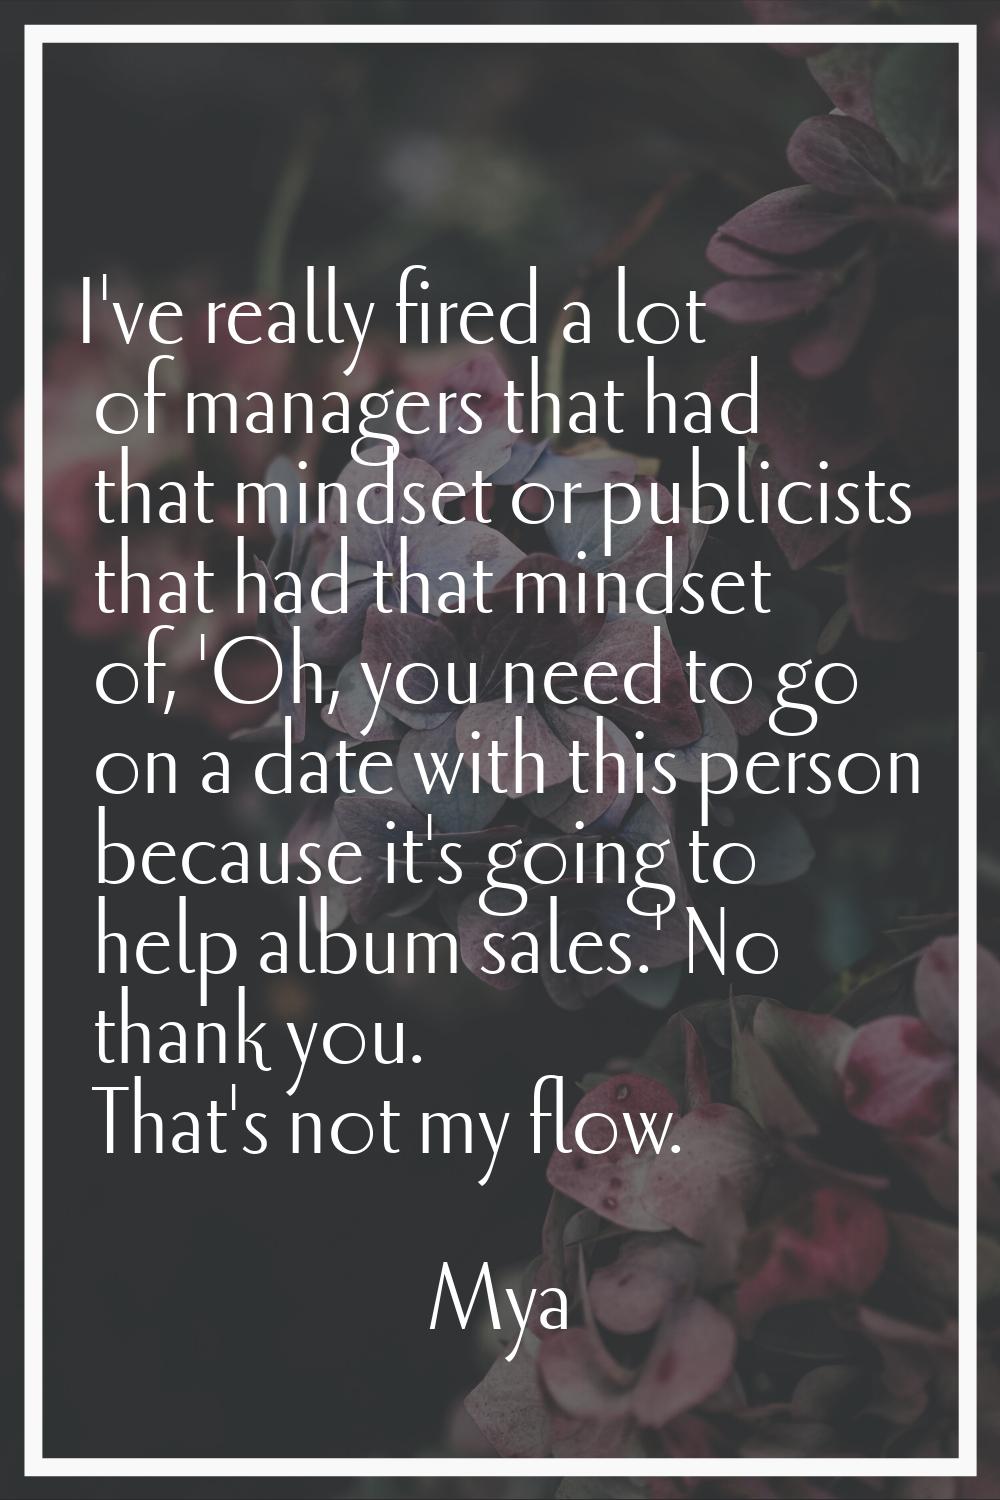 I've really fired a lot of managers that had that mindset or publicists that had that mindset of, '